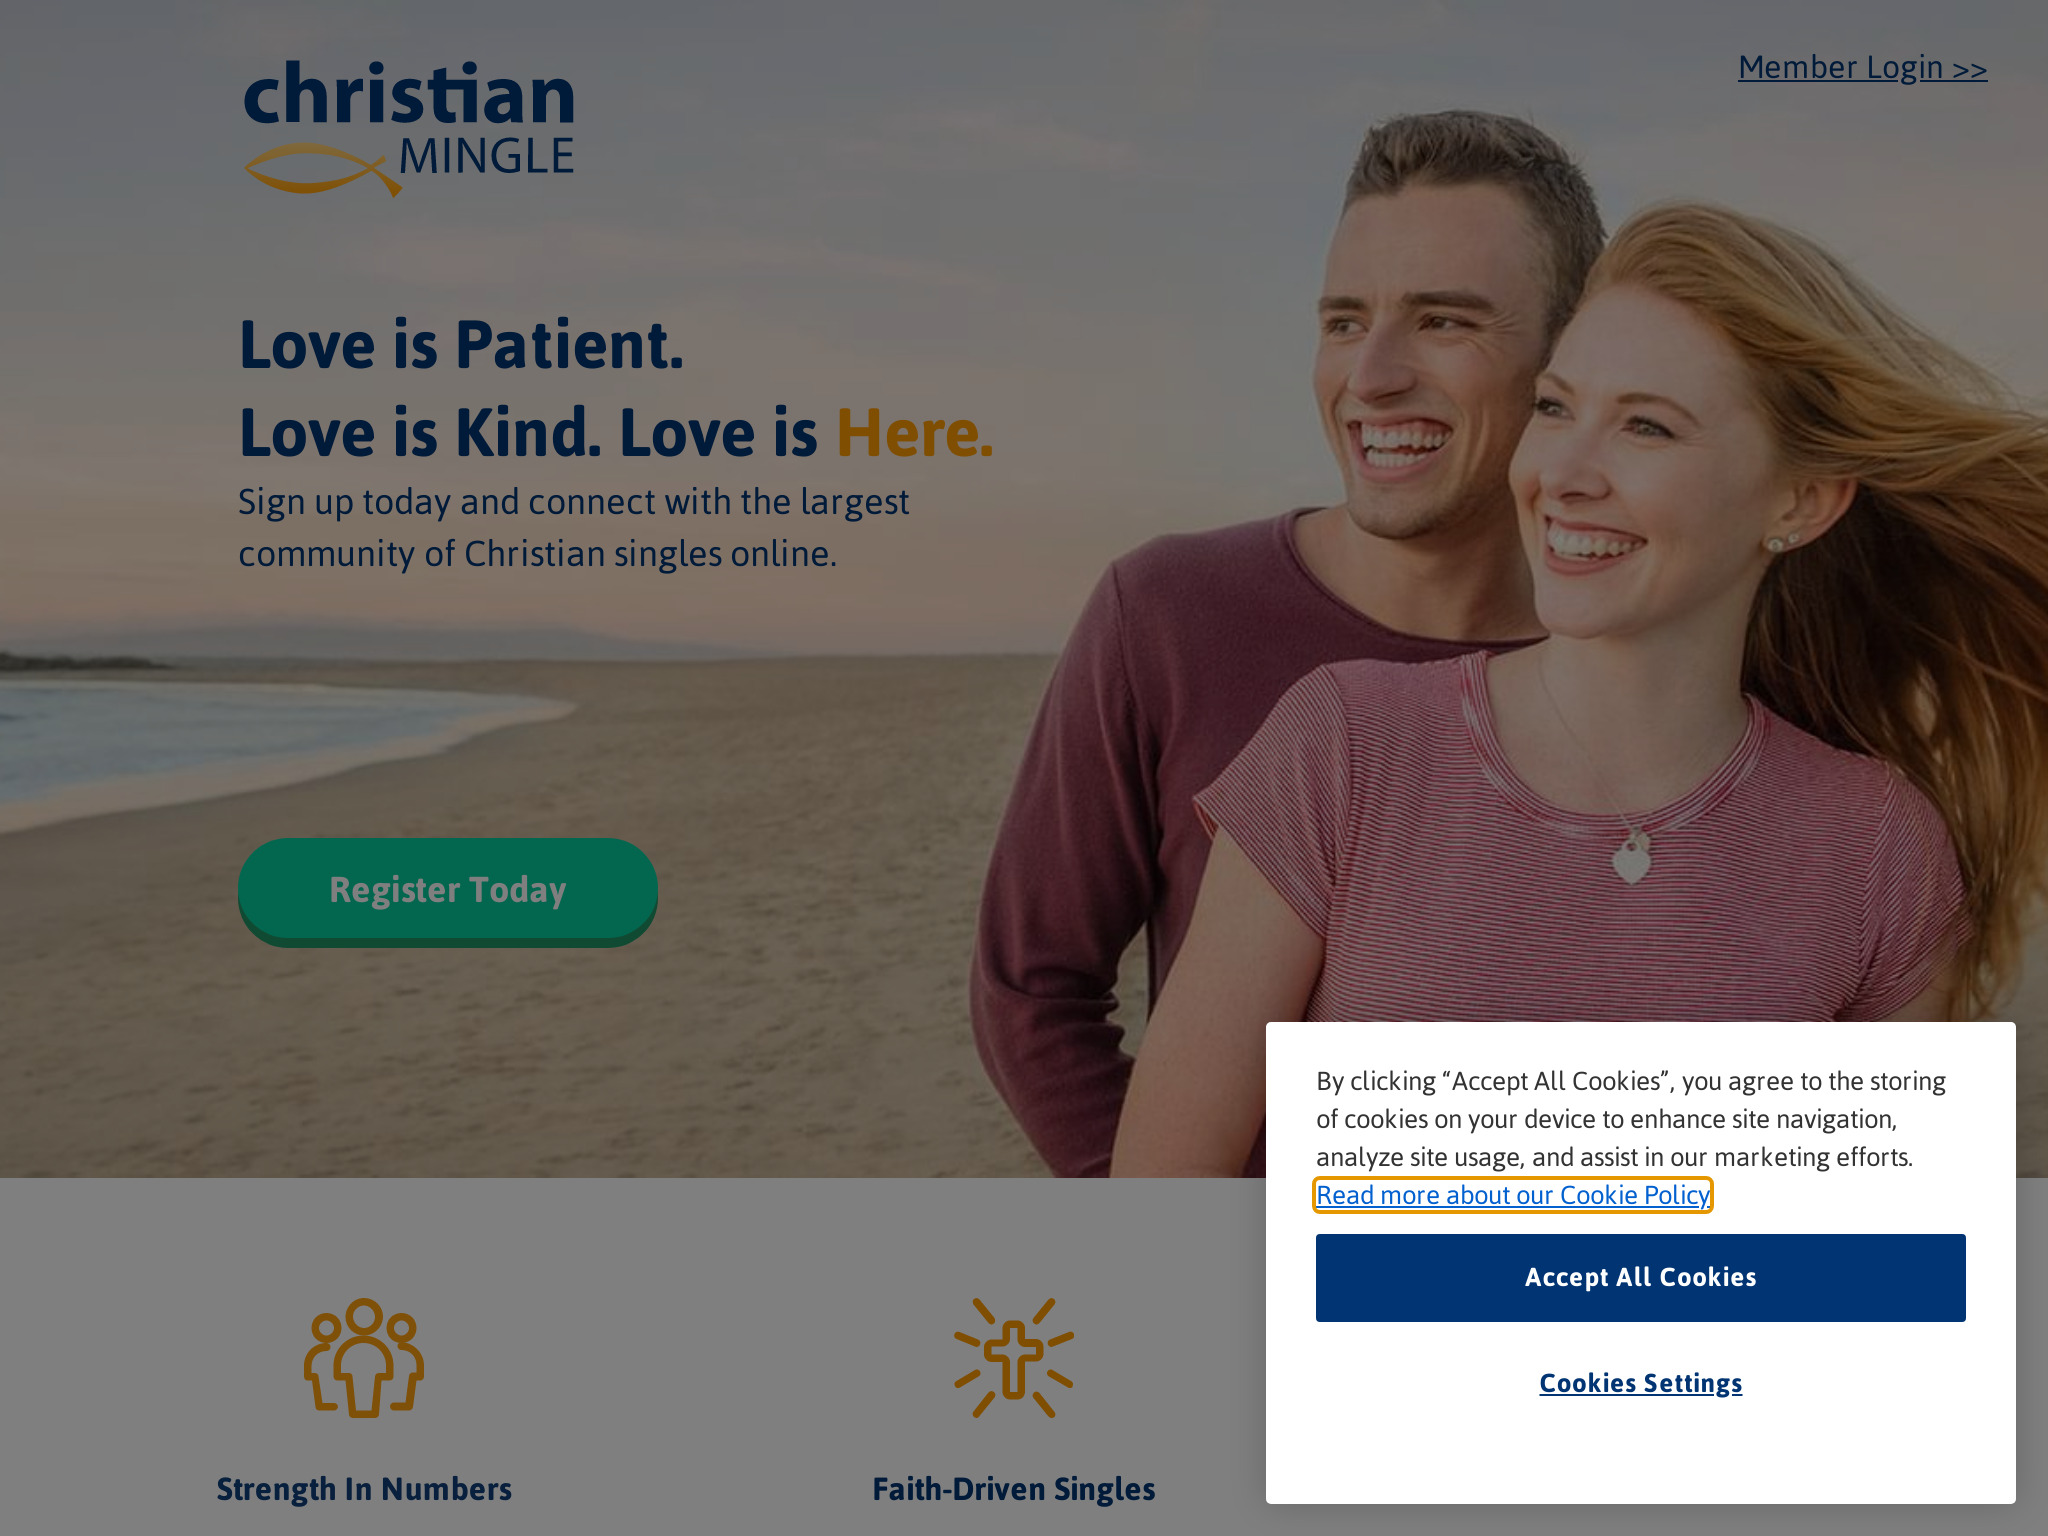 ChristianMingle Review: Is It a Good Choice for Online Dating in 2023?